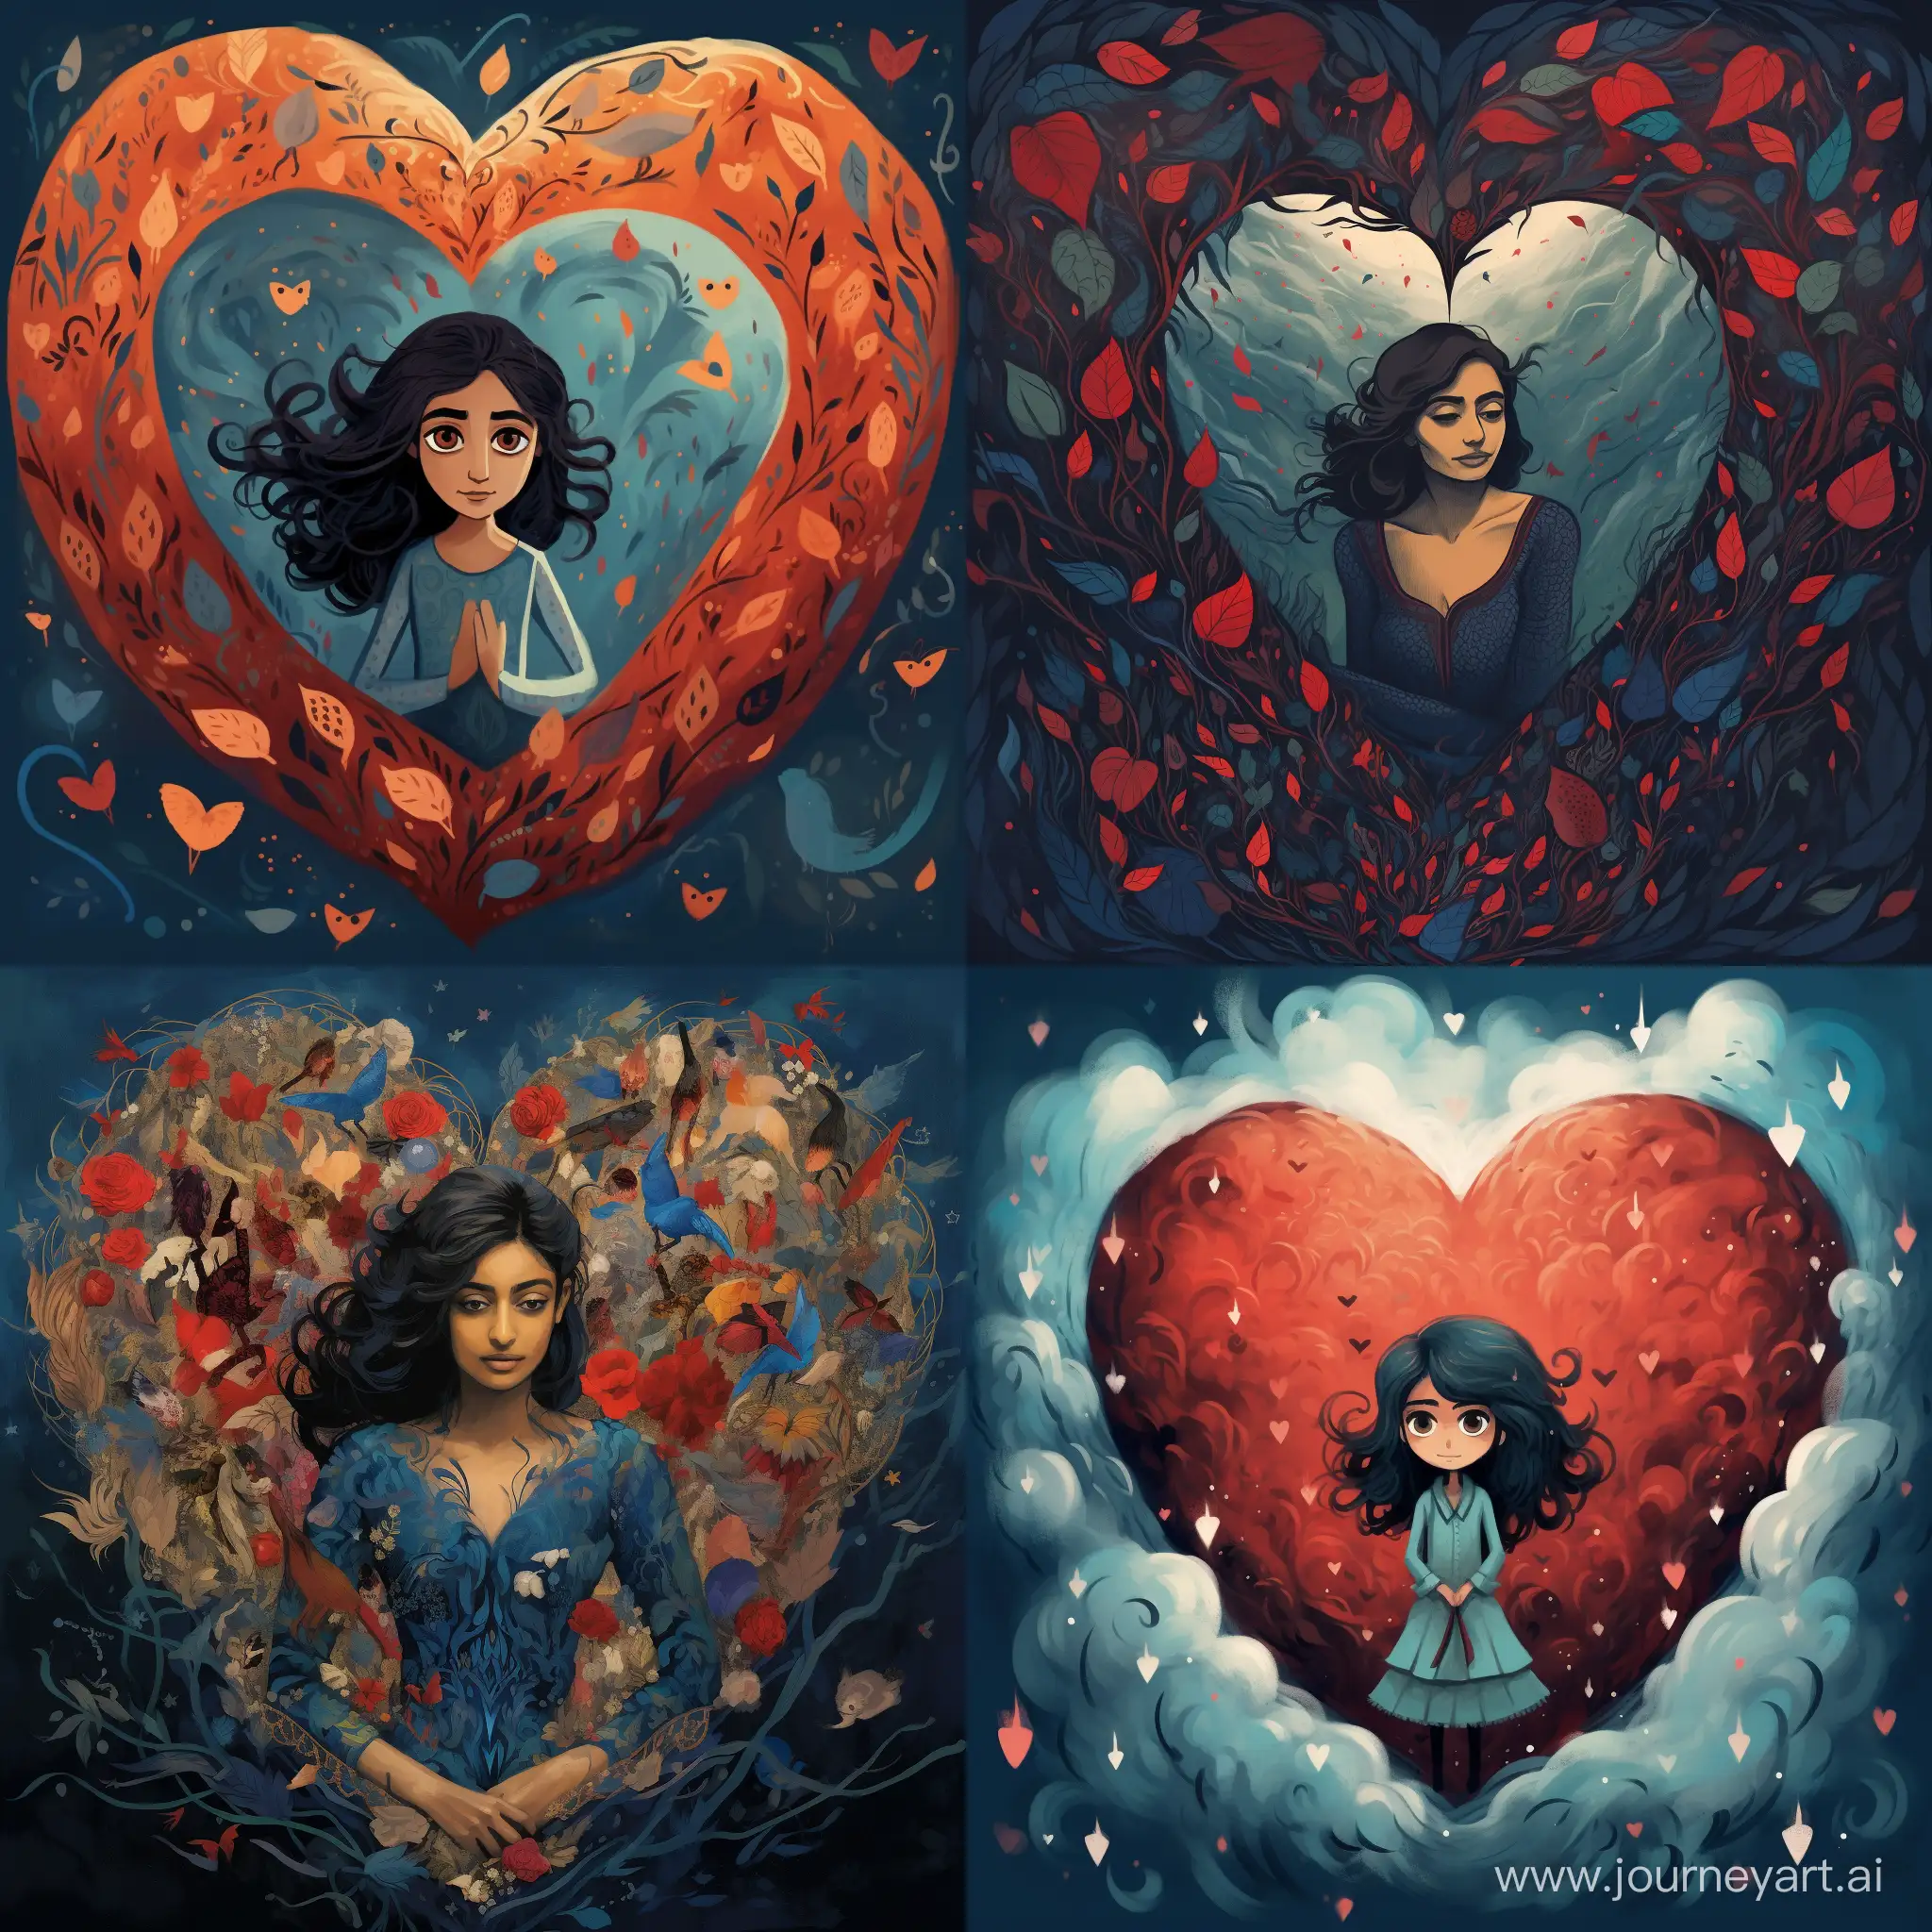 Zainab-Embraced-by-the-Heart-Emotional-Portrait-with-Aspect-Ratio-11